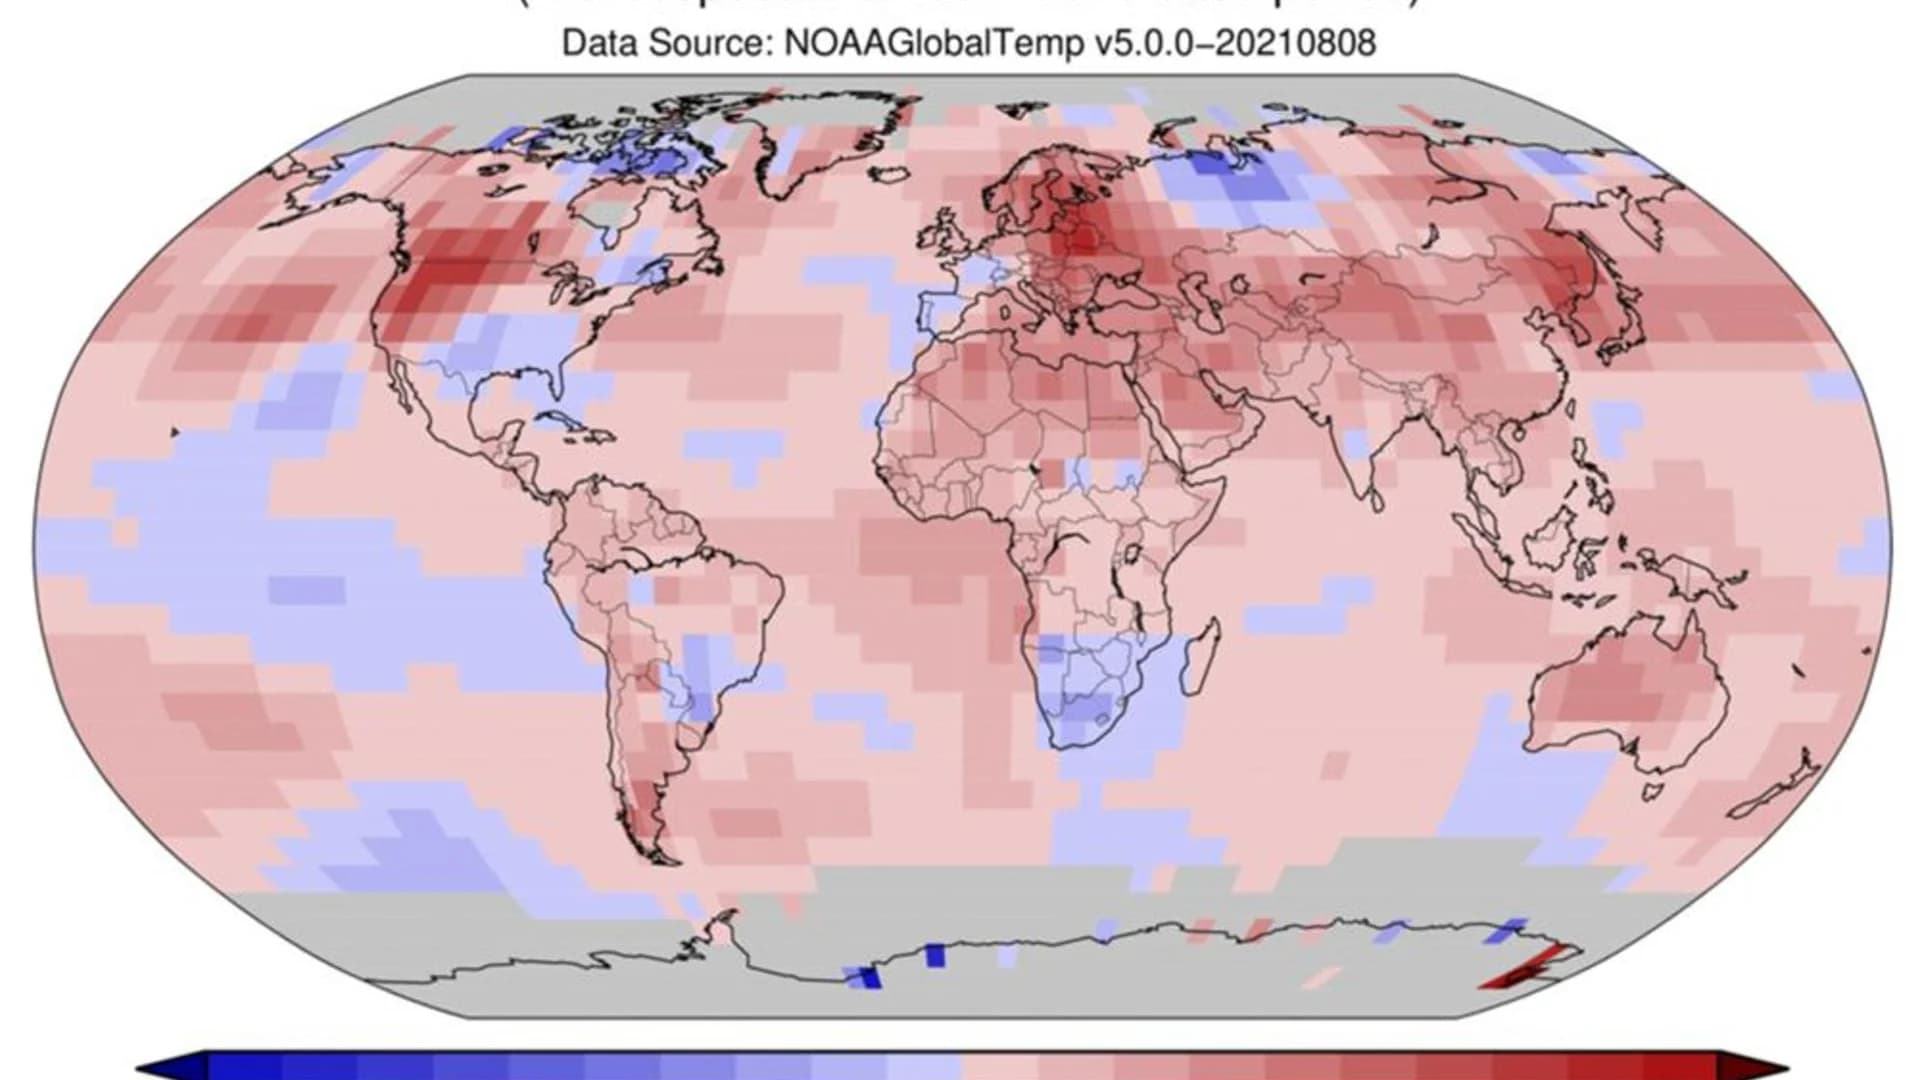 Global sizzling: July was hottest month on record, NOAA says